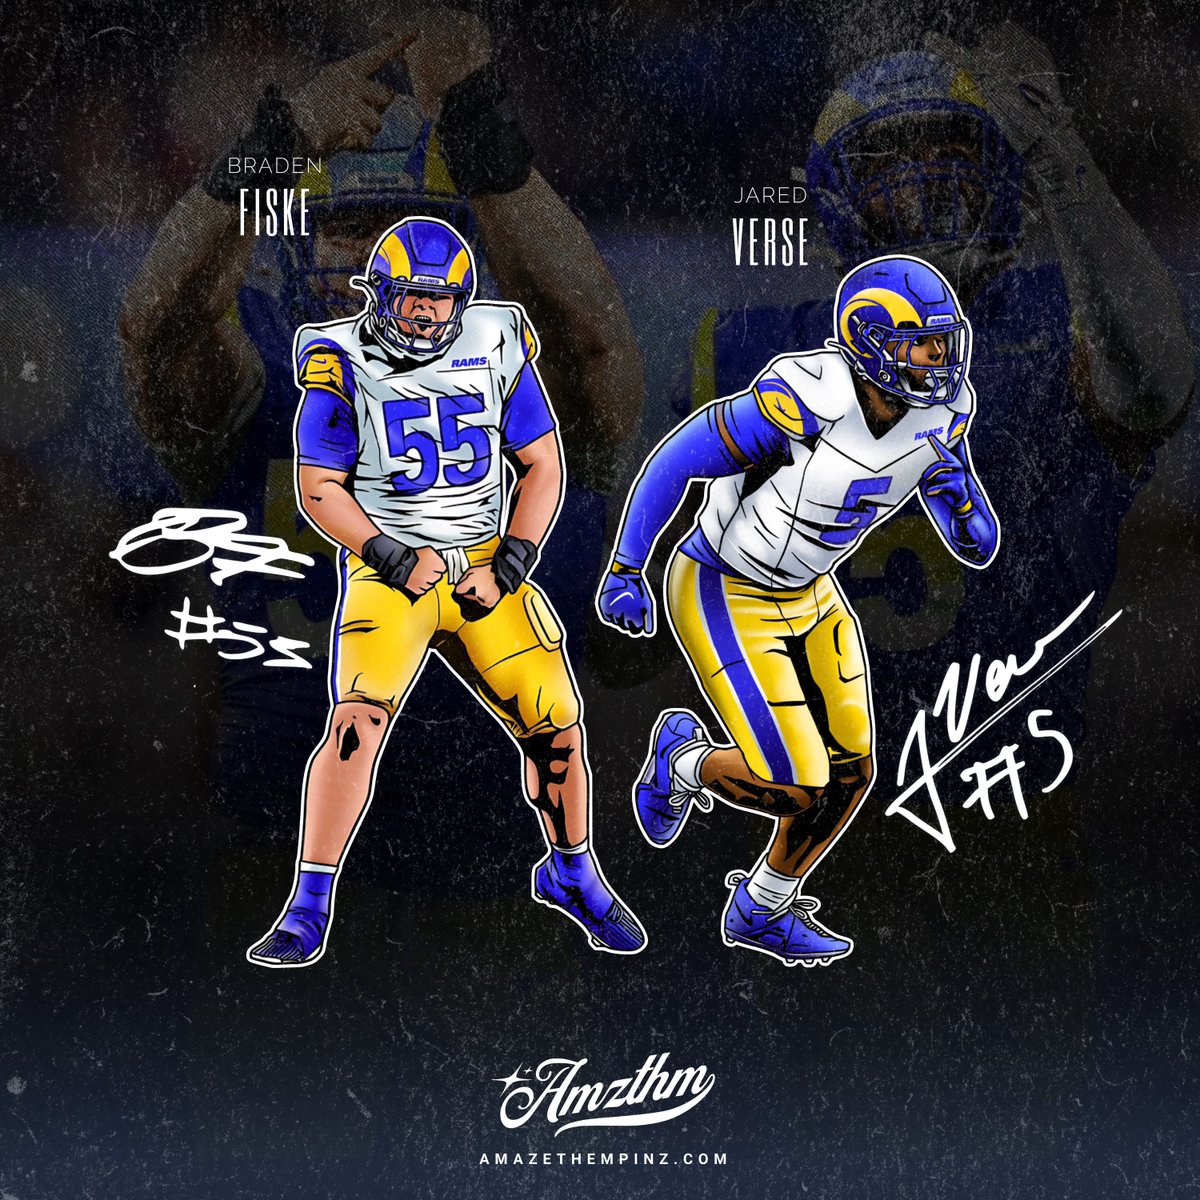 🚨Who wants a free Pin and sticker pack when I drop! 🔥🤝🏼

•Picking 5 People 
•Like and Retweet 
Lets show them some love #RamsHouse 

This one was super fun to create! These two are going to wreck havoc! @JaredVerse1  
@bradenfiske55